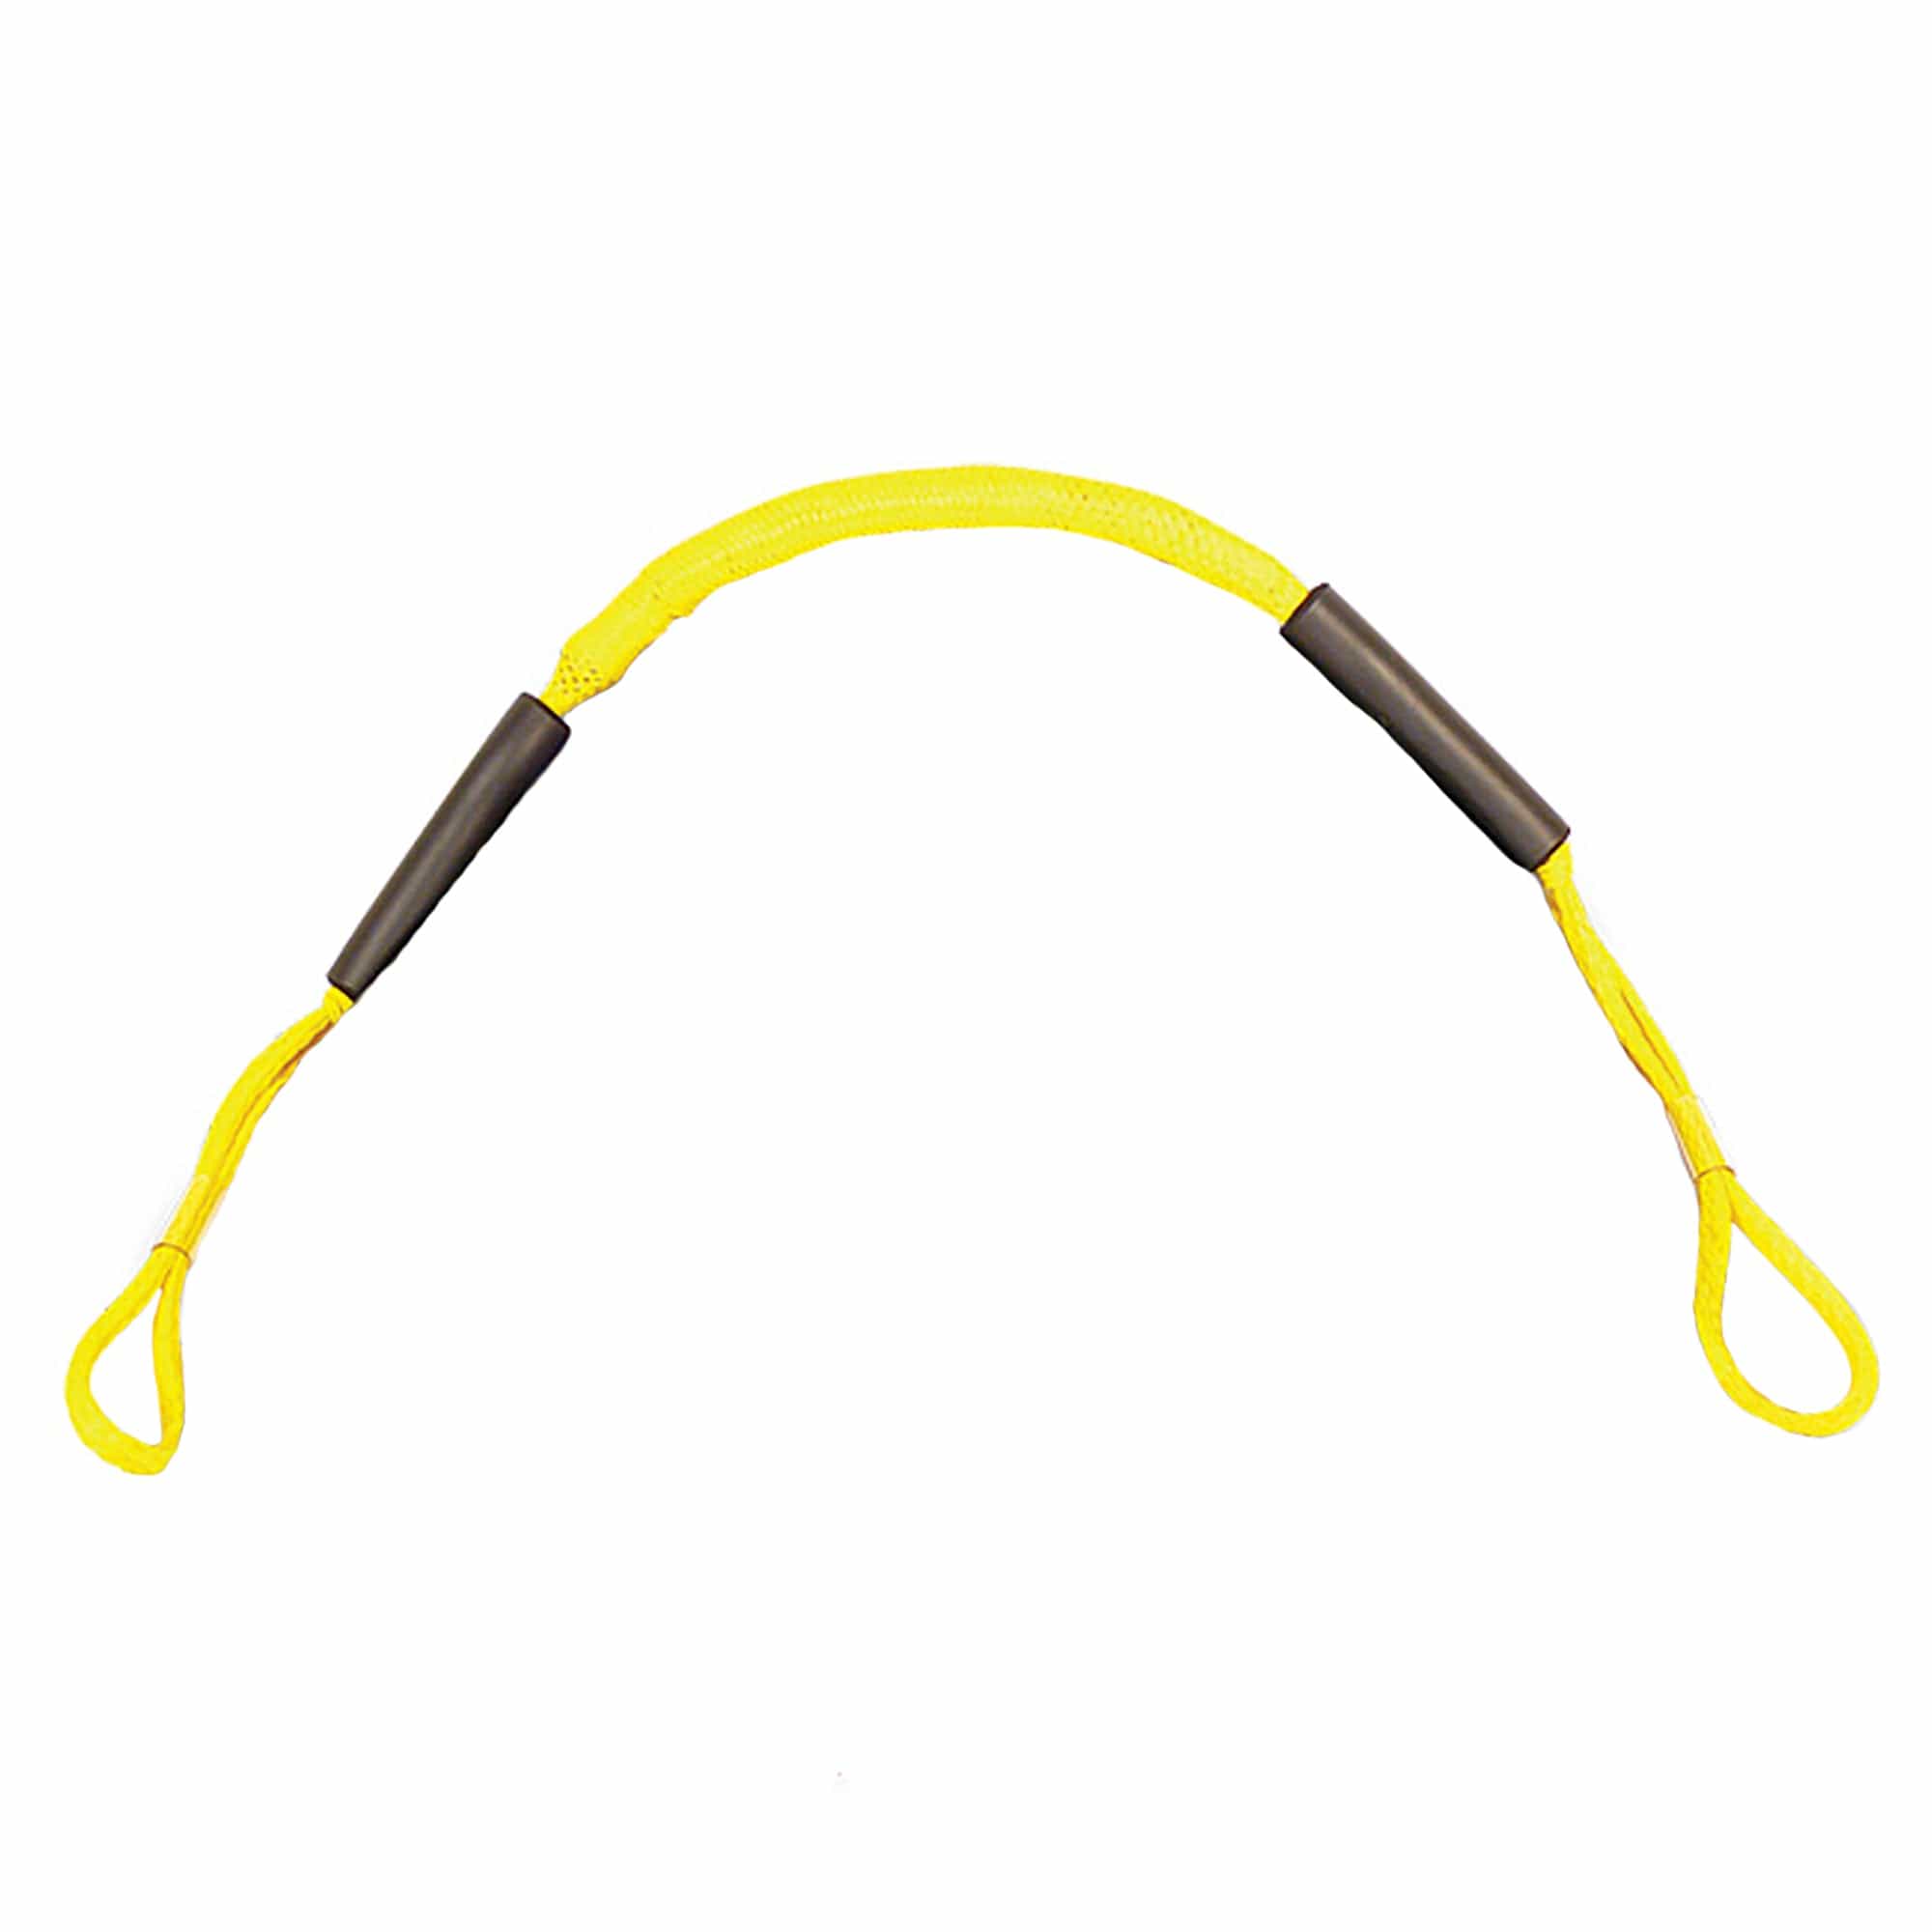 5' Dock Buddy - Yellow Bungie Cord Dock Line DB5-Y Greenfield Products